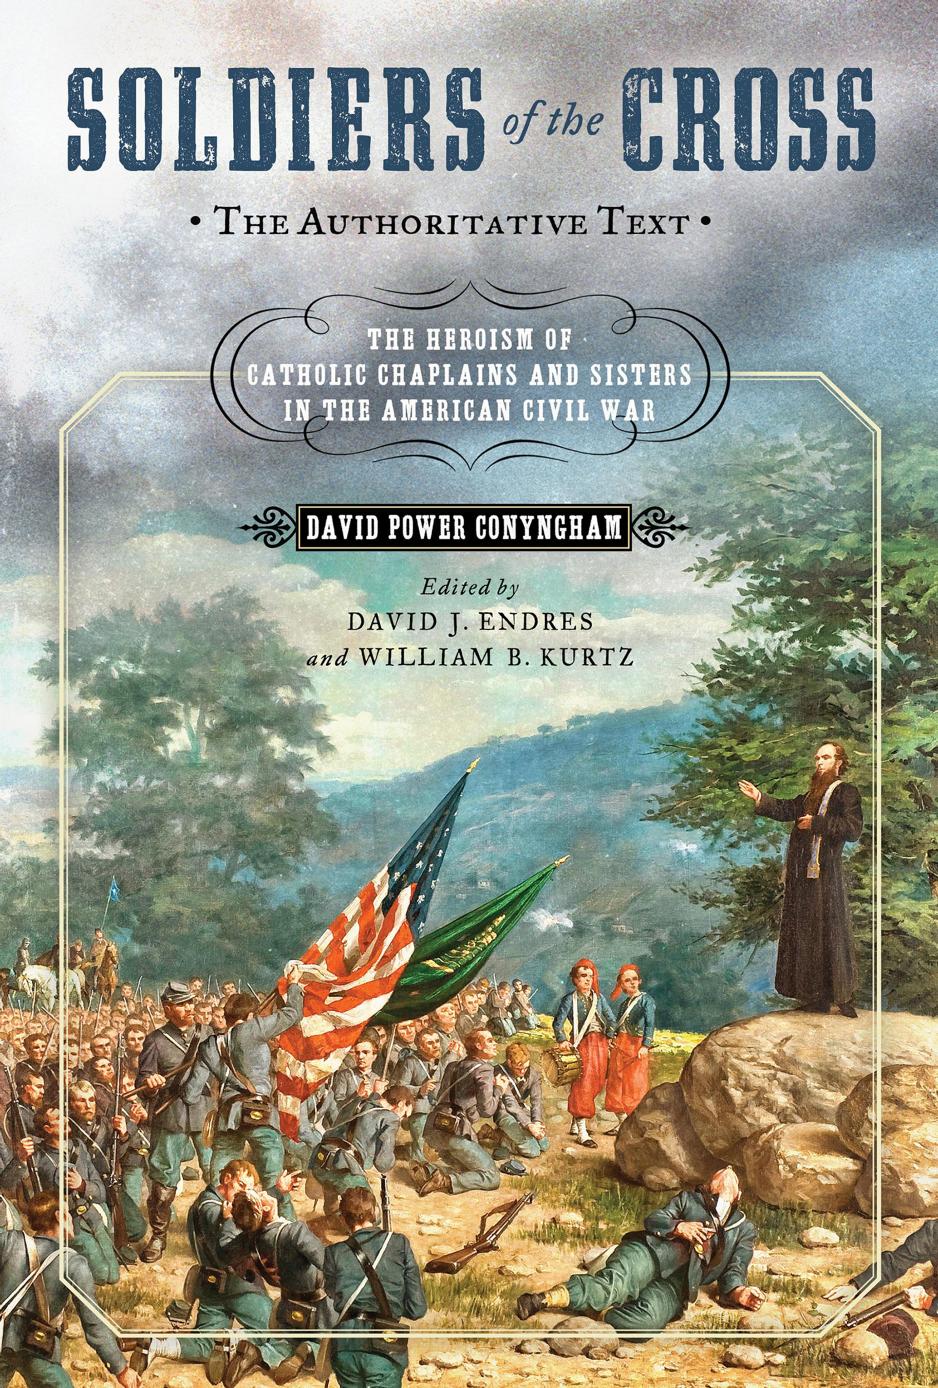 Soldiers of the Cross, the Authoritative Text : The Heroism of Catholic Chaplains and Sisters in the American Civil War by David Power Conyngham; David J. Endres; William B. Kurtz